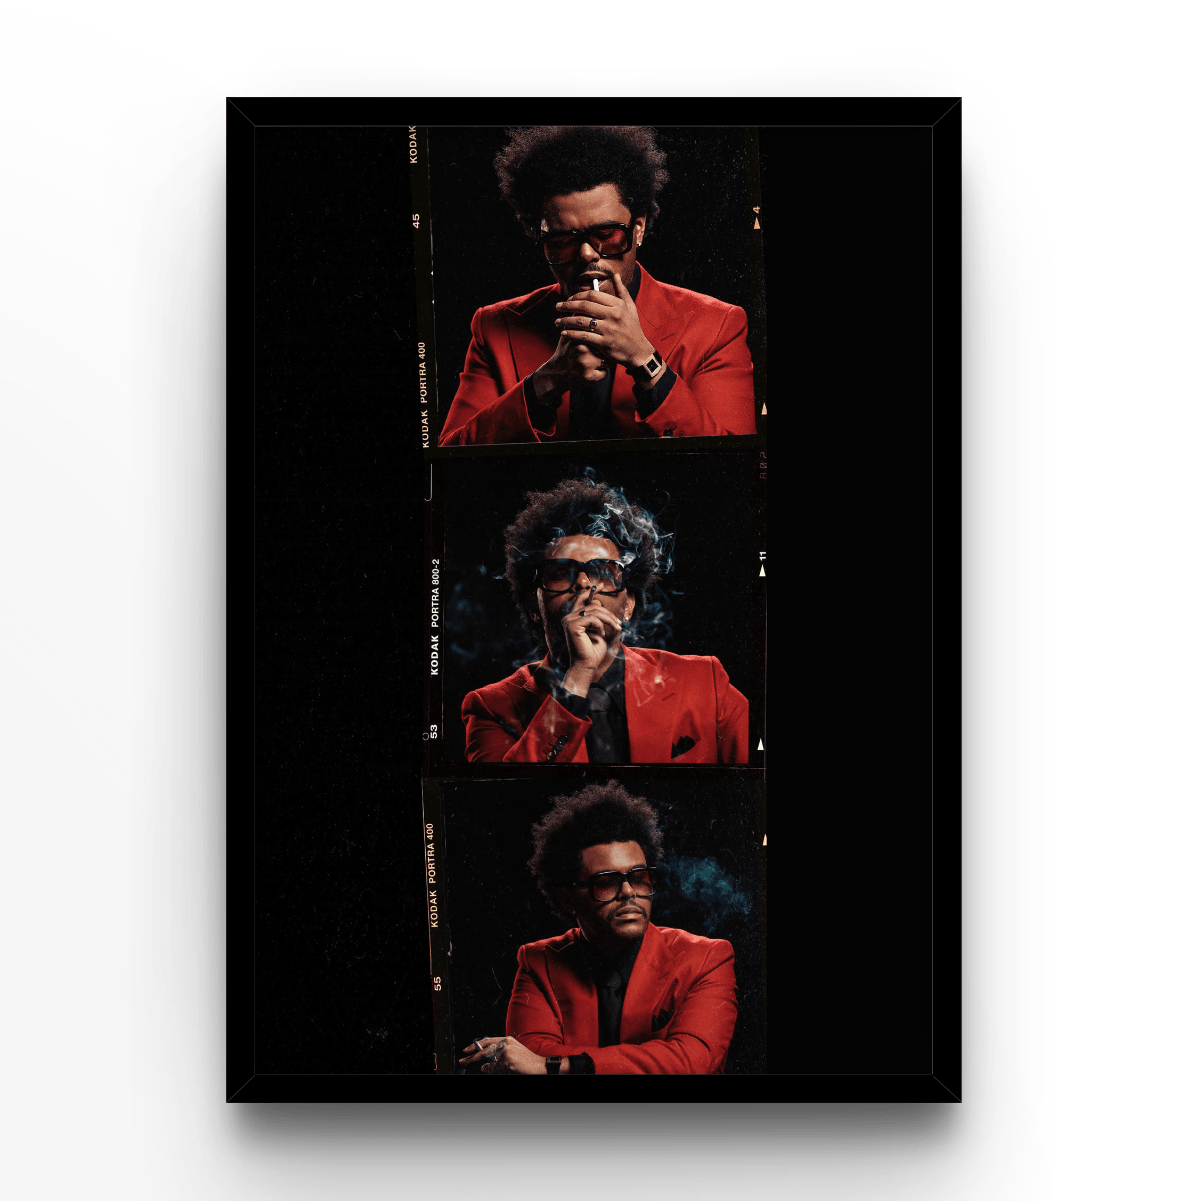 The Weeknd Heartless - A4, A3, A2 Posters Base - Poster Print Shop / Art Prints / PostersBase